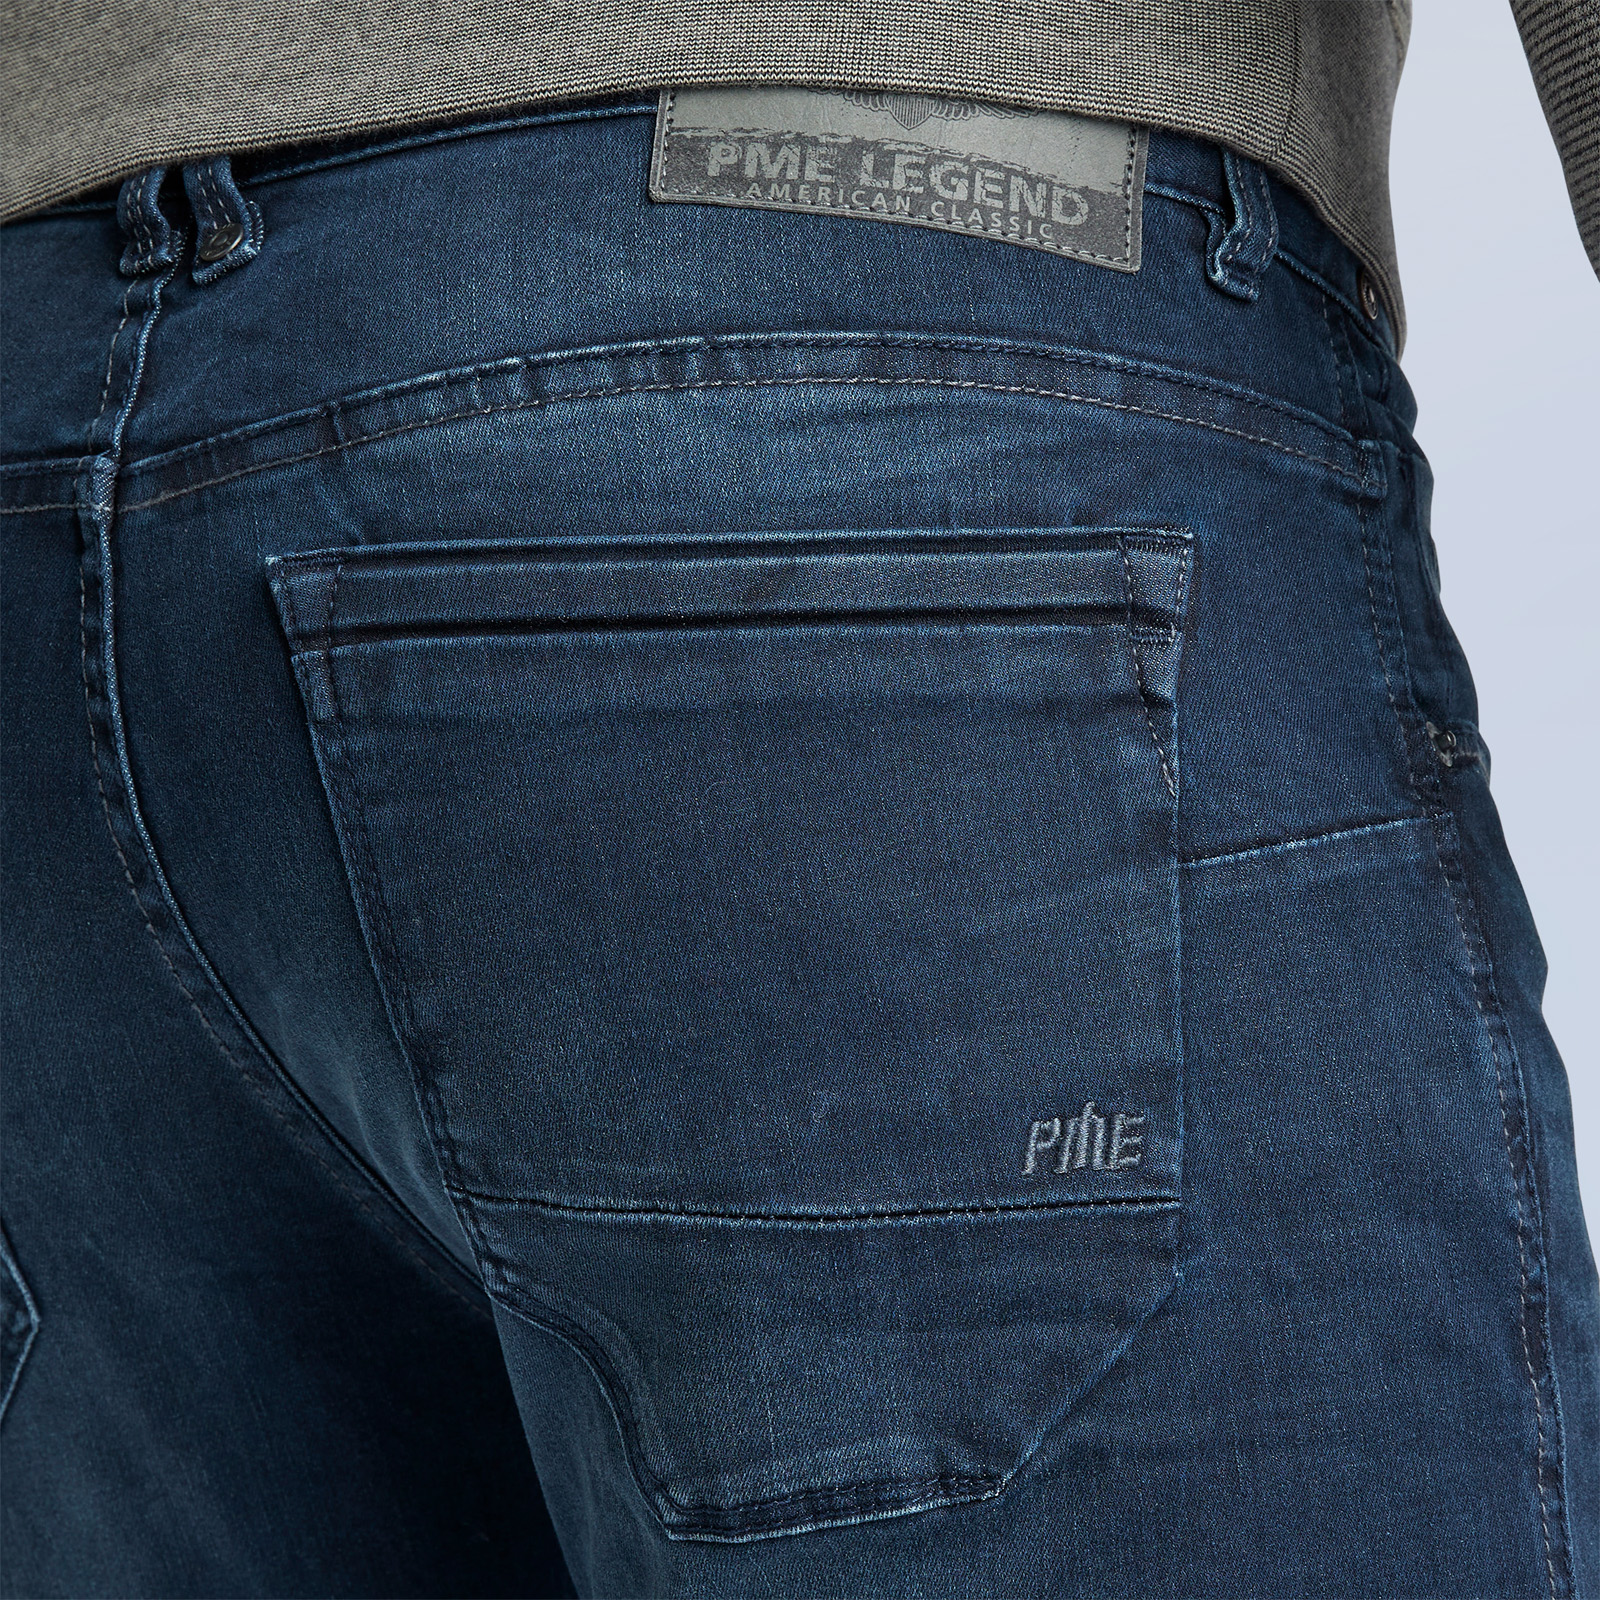 onszelf Moedig aan Geen PME JEANS | PME Legend Nightflight Jeans | Free shipping and returns